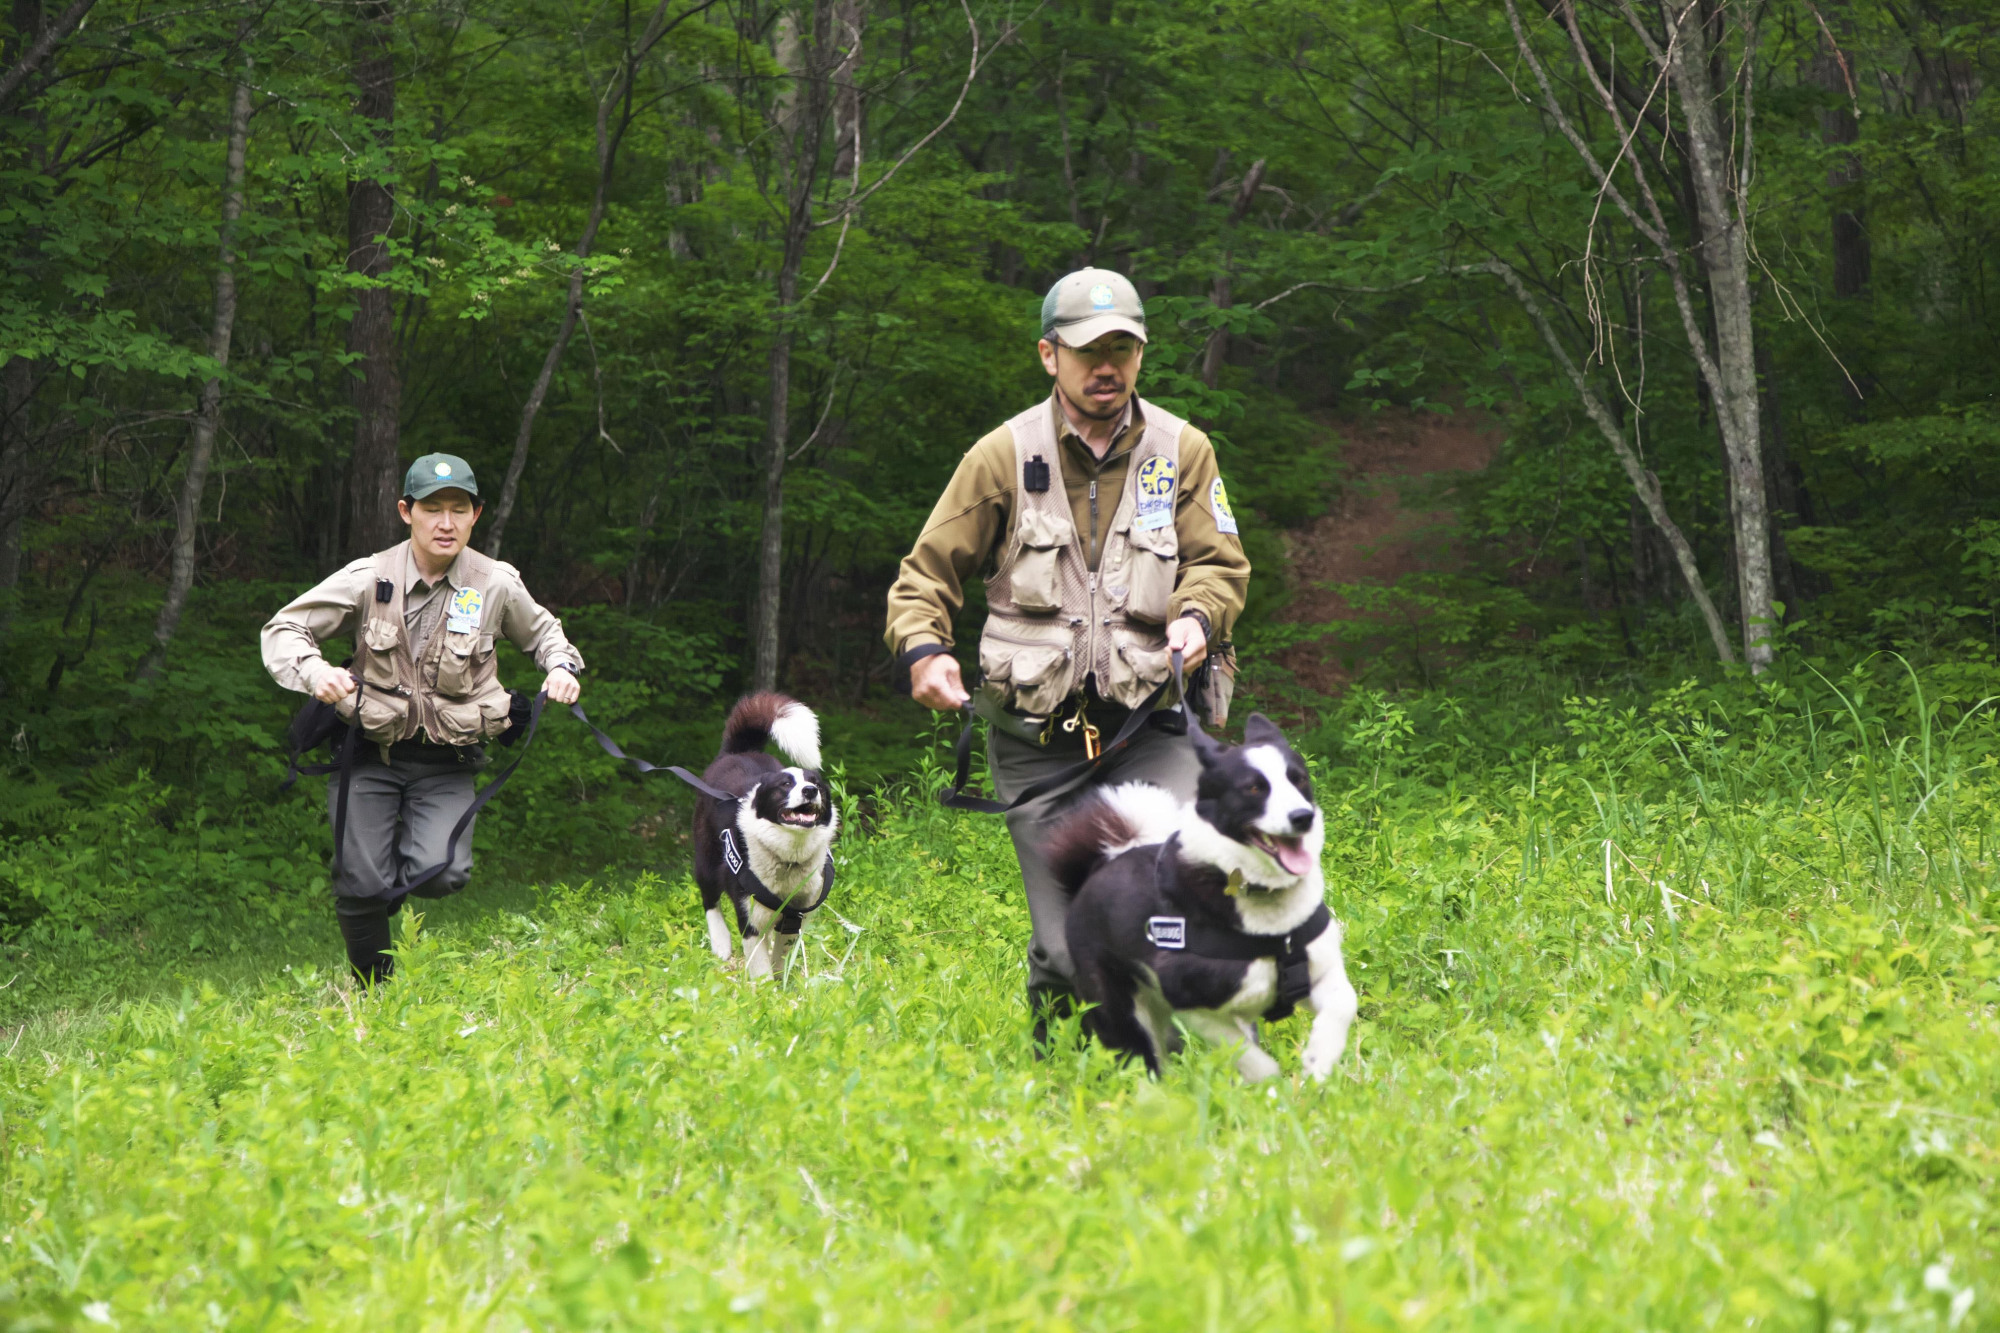 Handler Jumpei Tanaka (right) works with a Karelian bear dog in Karuizawa, Nagano Prefecture. Picchio, a nonprofit organization devoted to conserving bears, raises and trains Karelian dogs to chase bears away from residential areas. | COURTESY OF PICCHIO / VIA KYODO